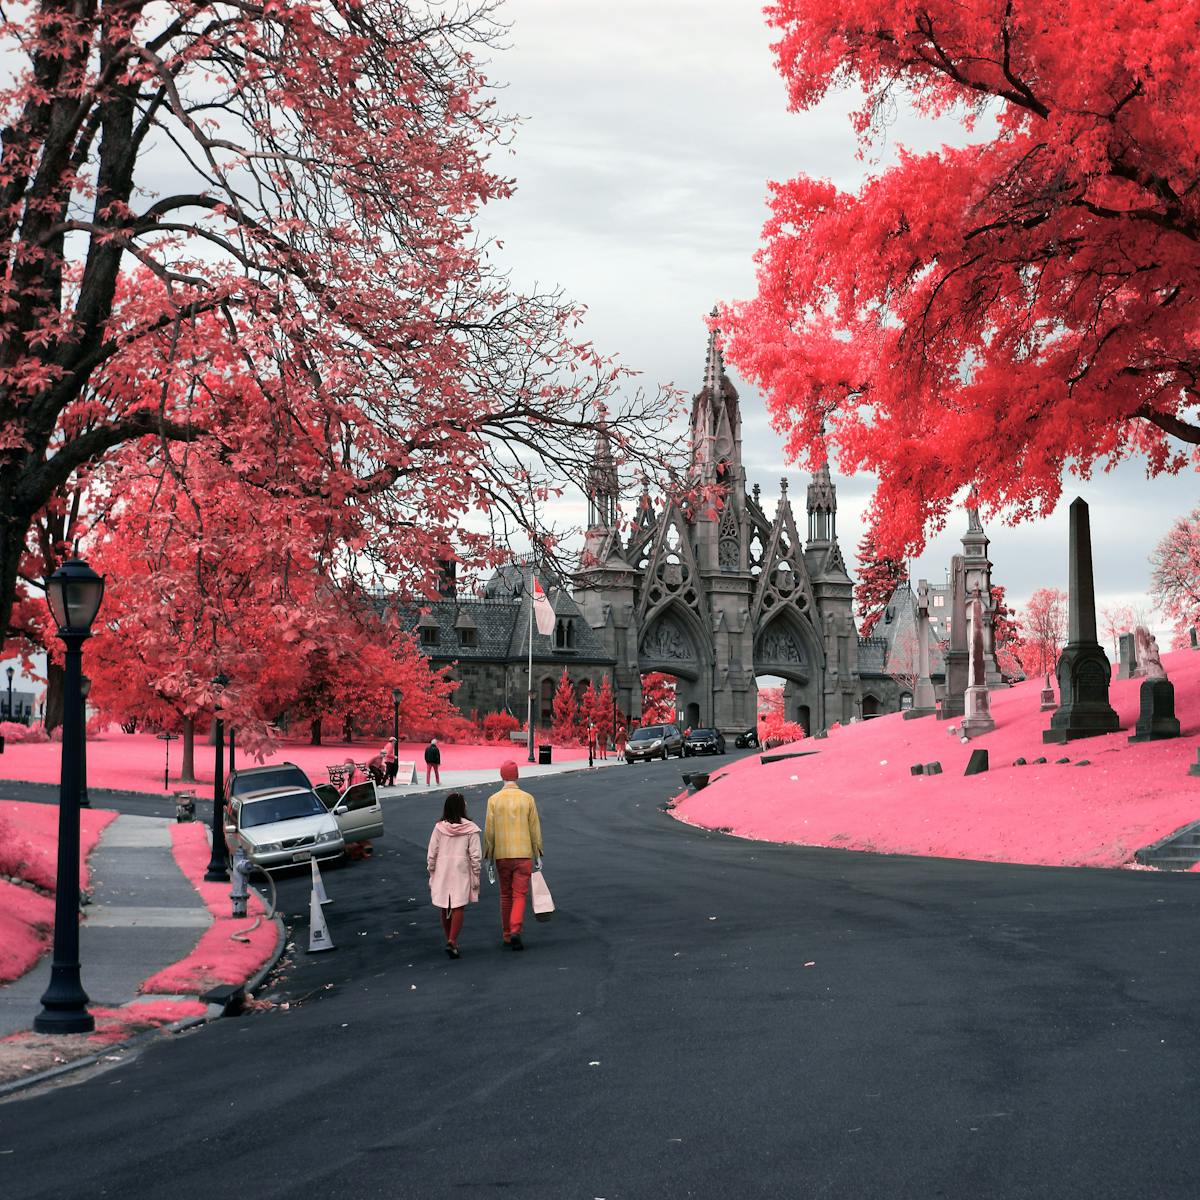 Infrared photograph of the entrance to Green-Wood Cemetery. In the bottom left portion of the image two people are walking towards the Neo-Gothic entrance to Green Wood Cemetary. The road has a series of parked cars of which one has a door open. To the right of the frame there is a large tree towering over several grave stones. The pink hues replacing the greens of the grass and trees are a result of the infrared technique.